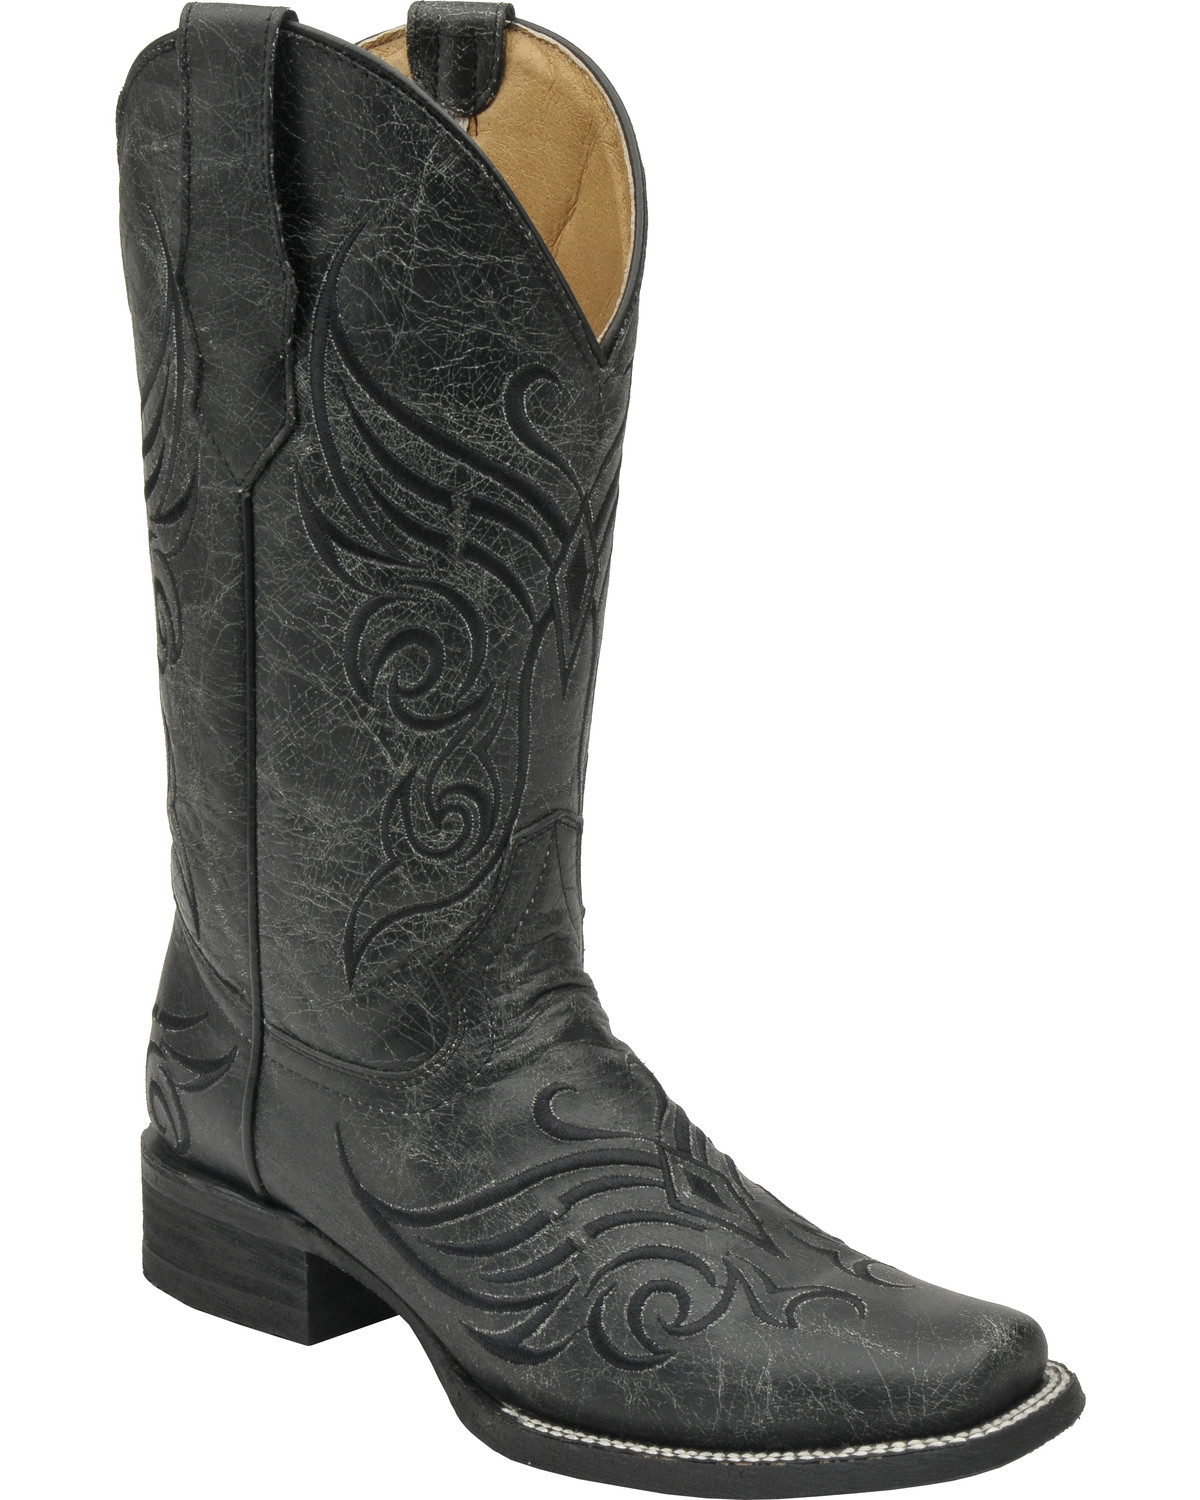 circle g boots for women